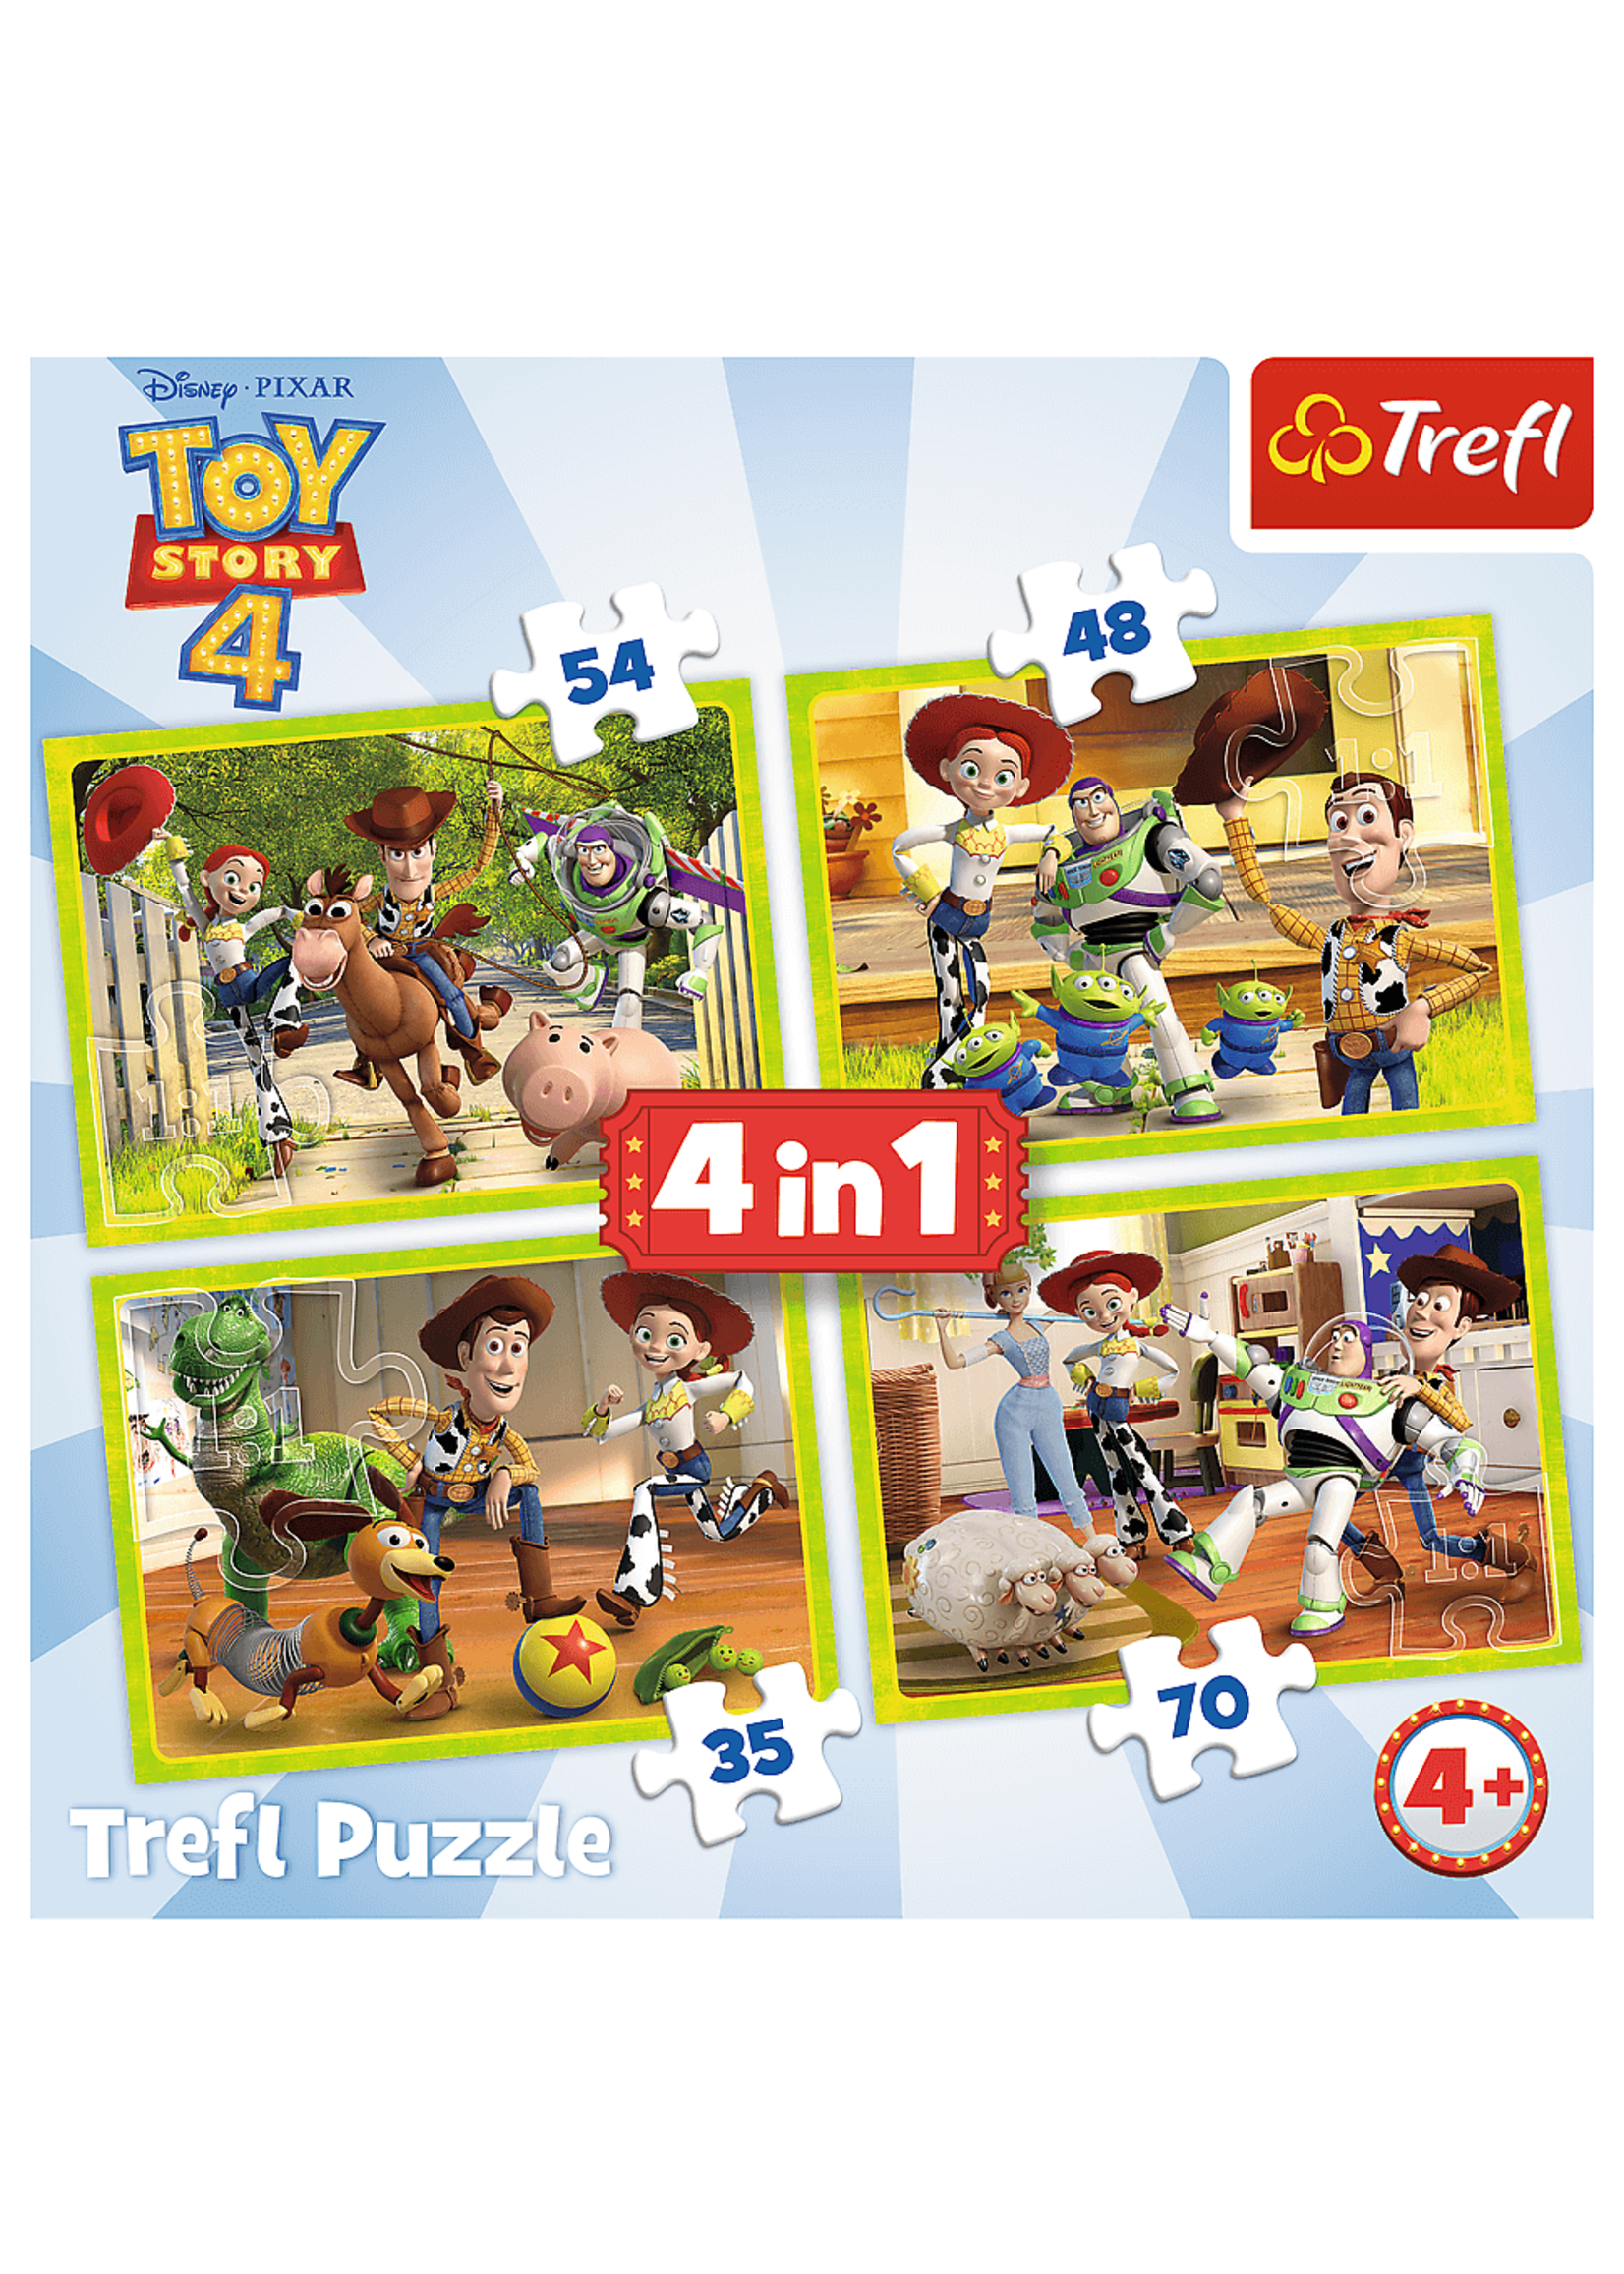 Disney Toy Story 4 in 1 puzzle from Disney